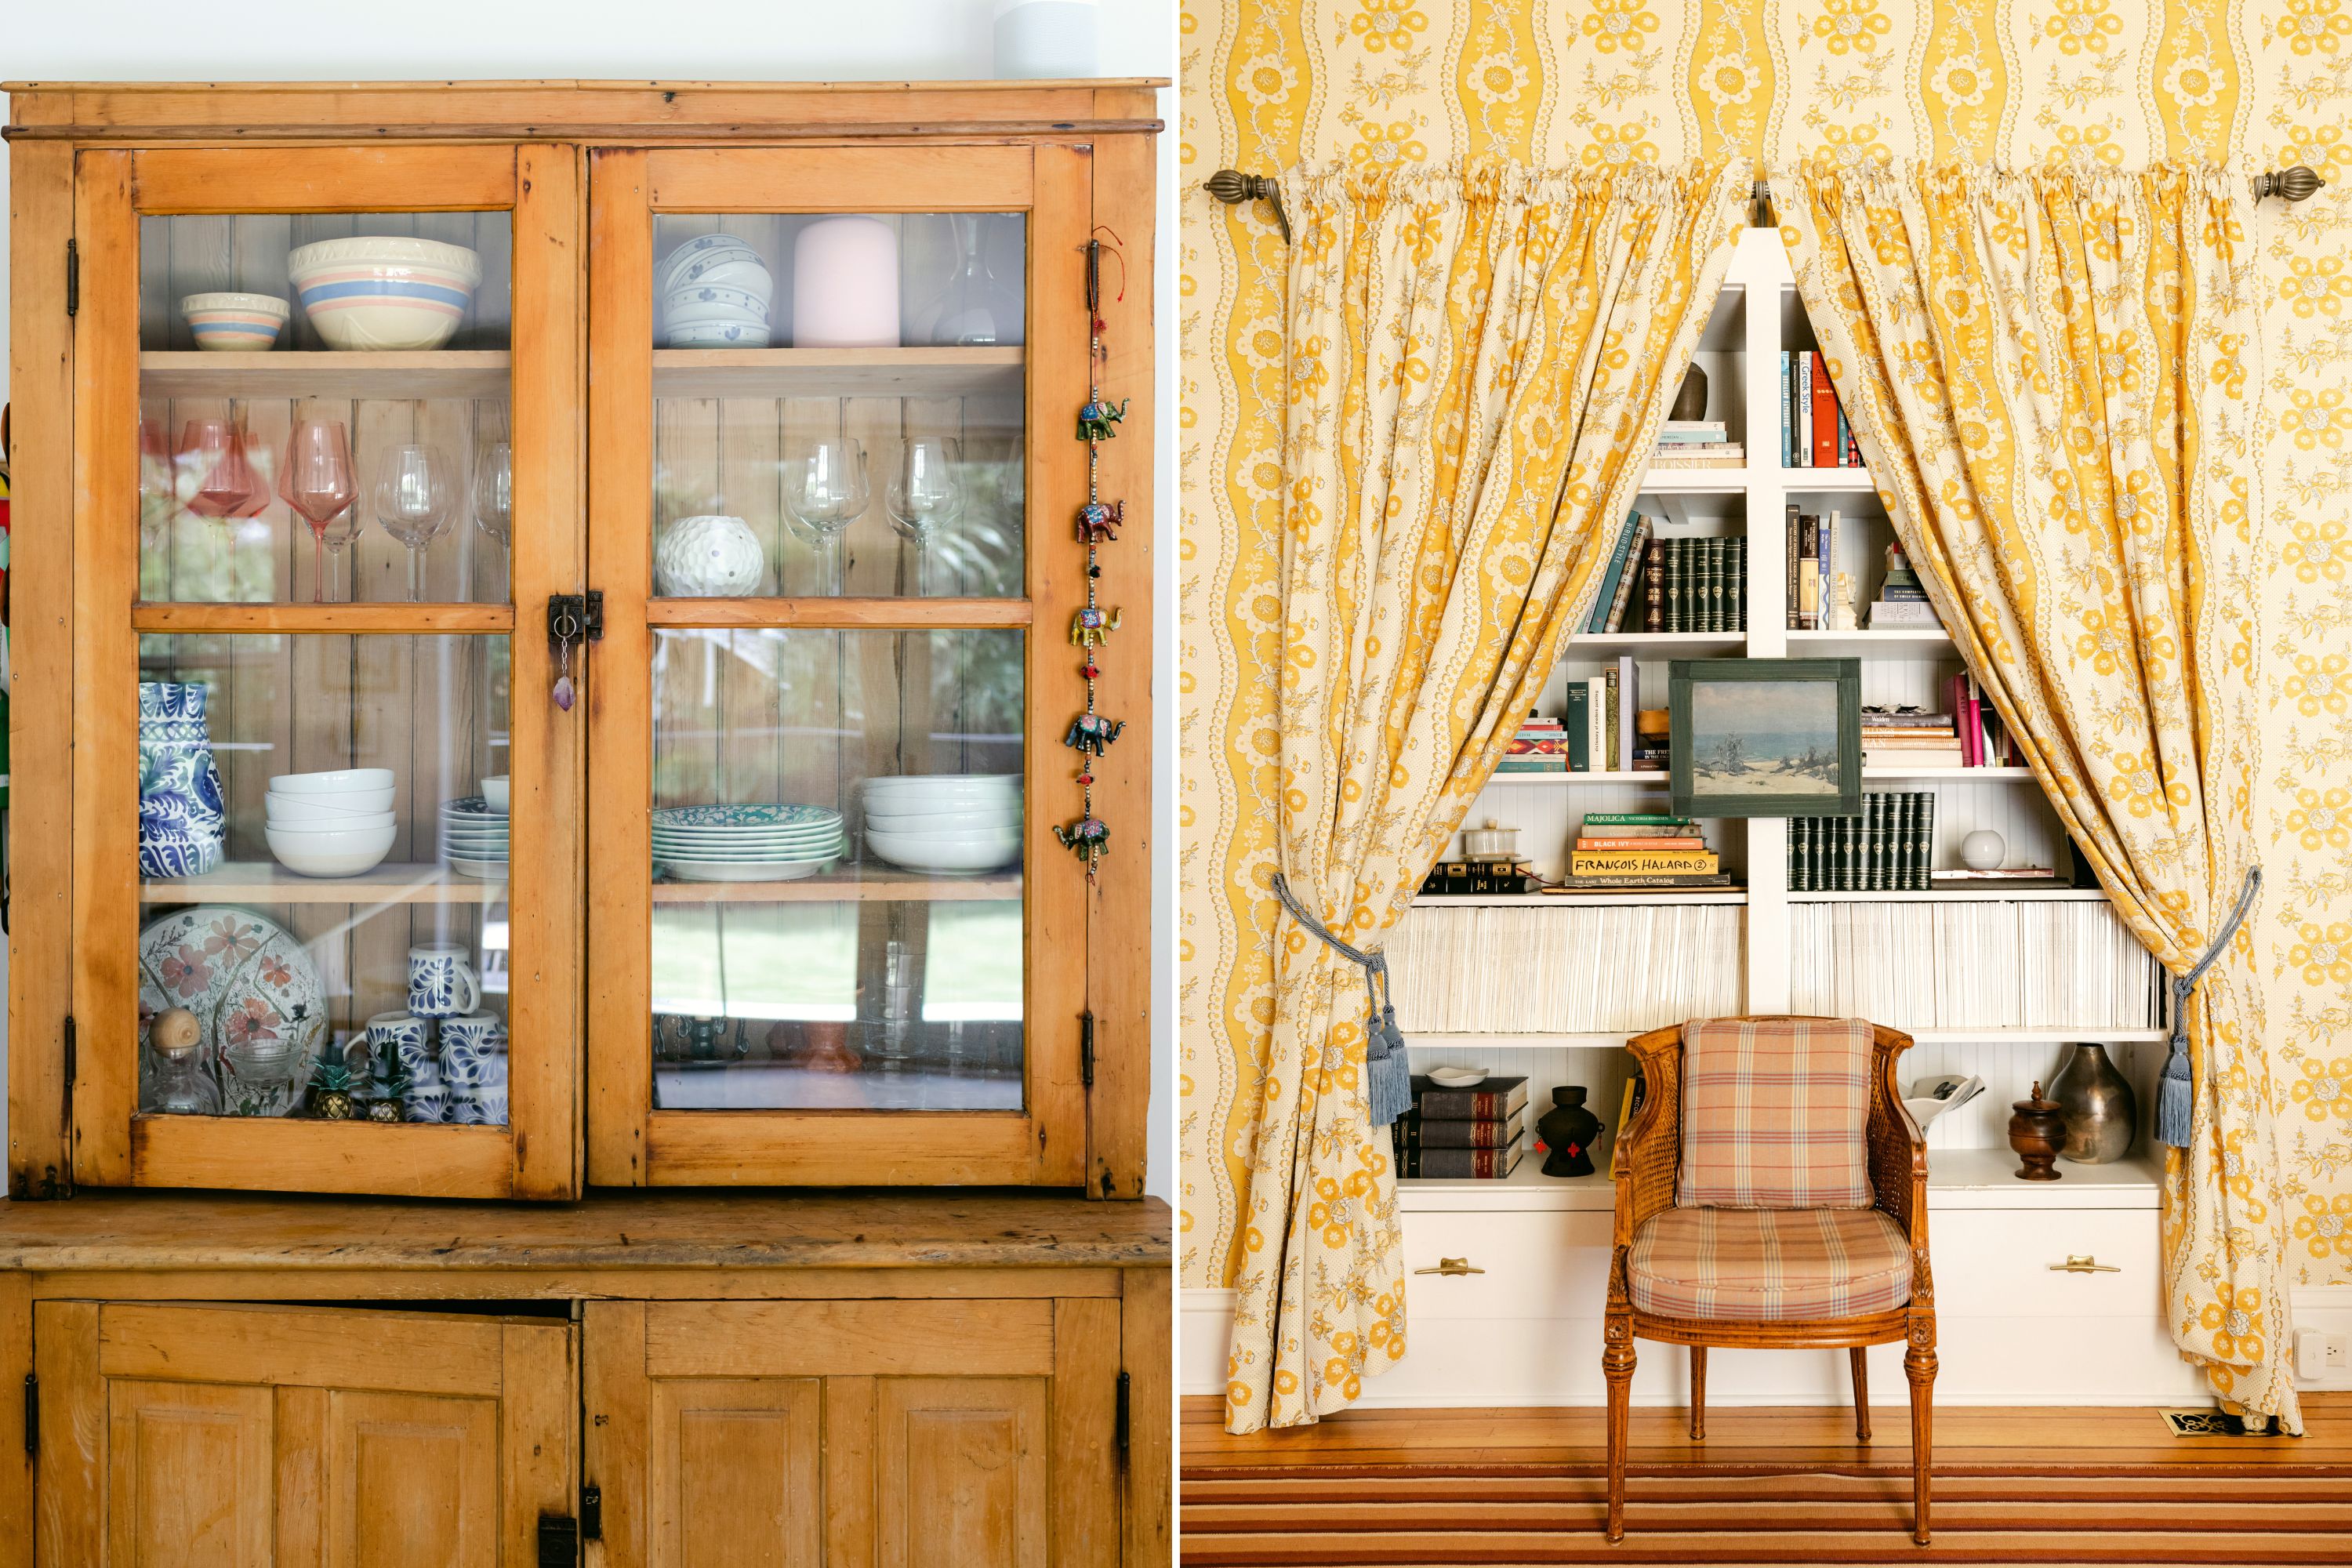 A collage of two images: A weathered sideboard cupboard with eclectic dishes; yellow floral drapery frames a book case with a plaid and wood chair.